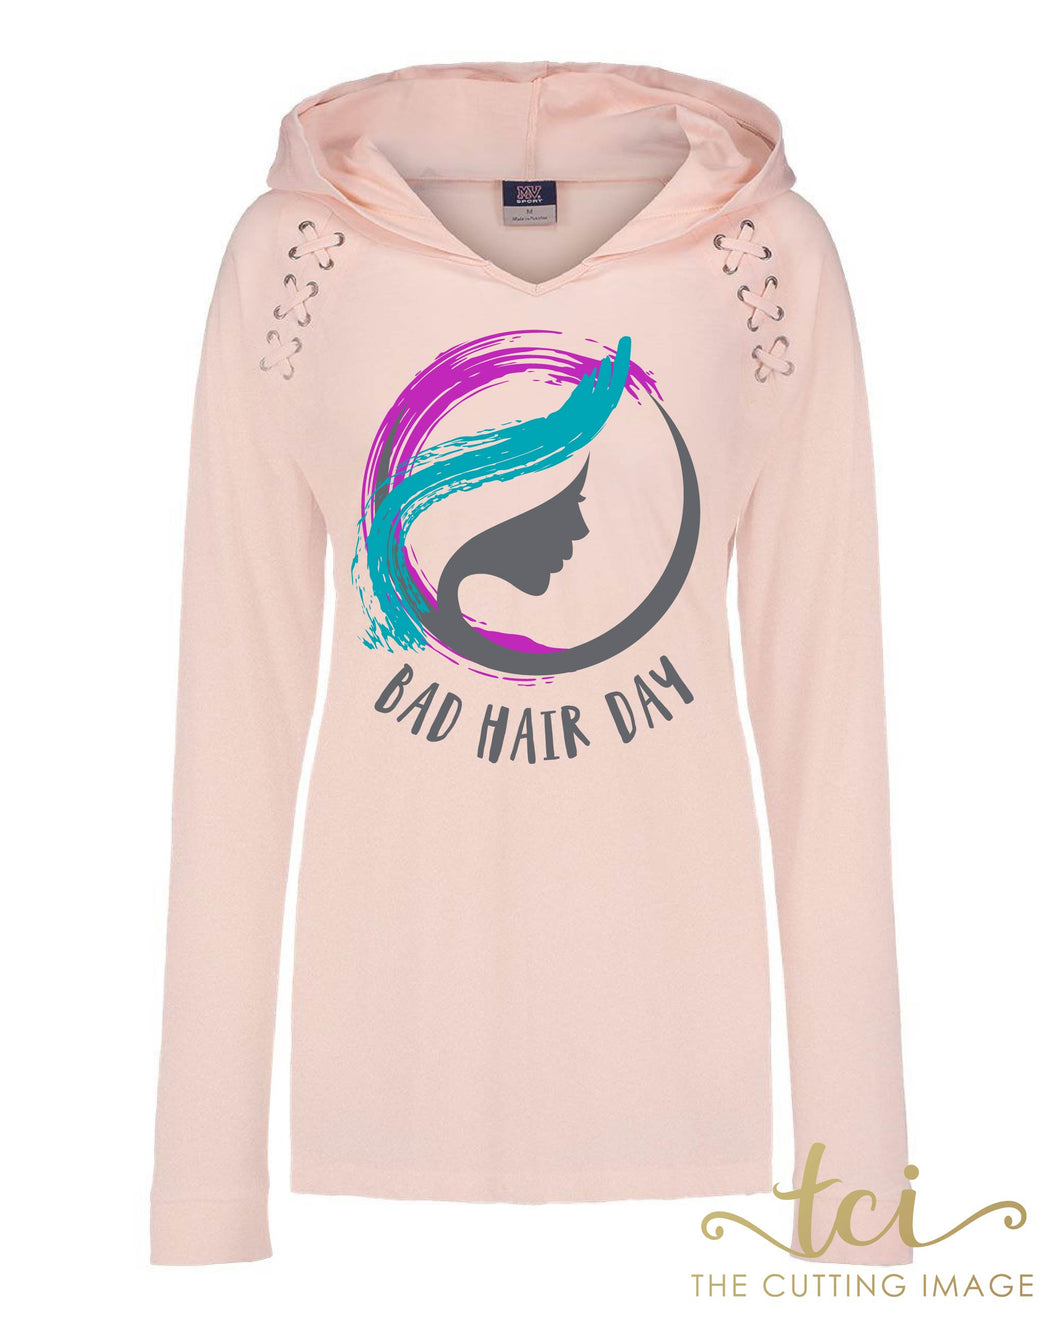 Bad Hair Day- Suicide Awareness Pullover Long Sleeve T-Shirt